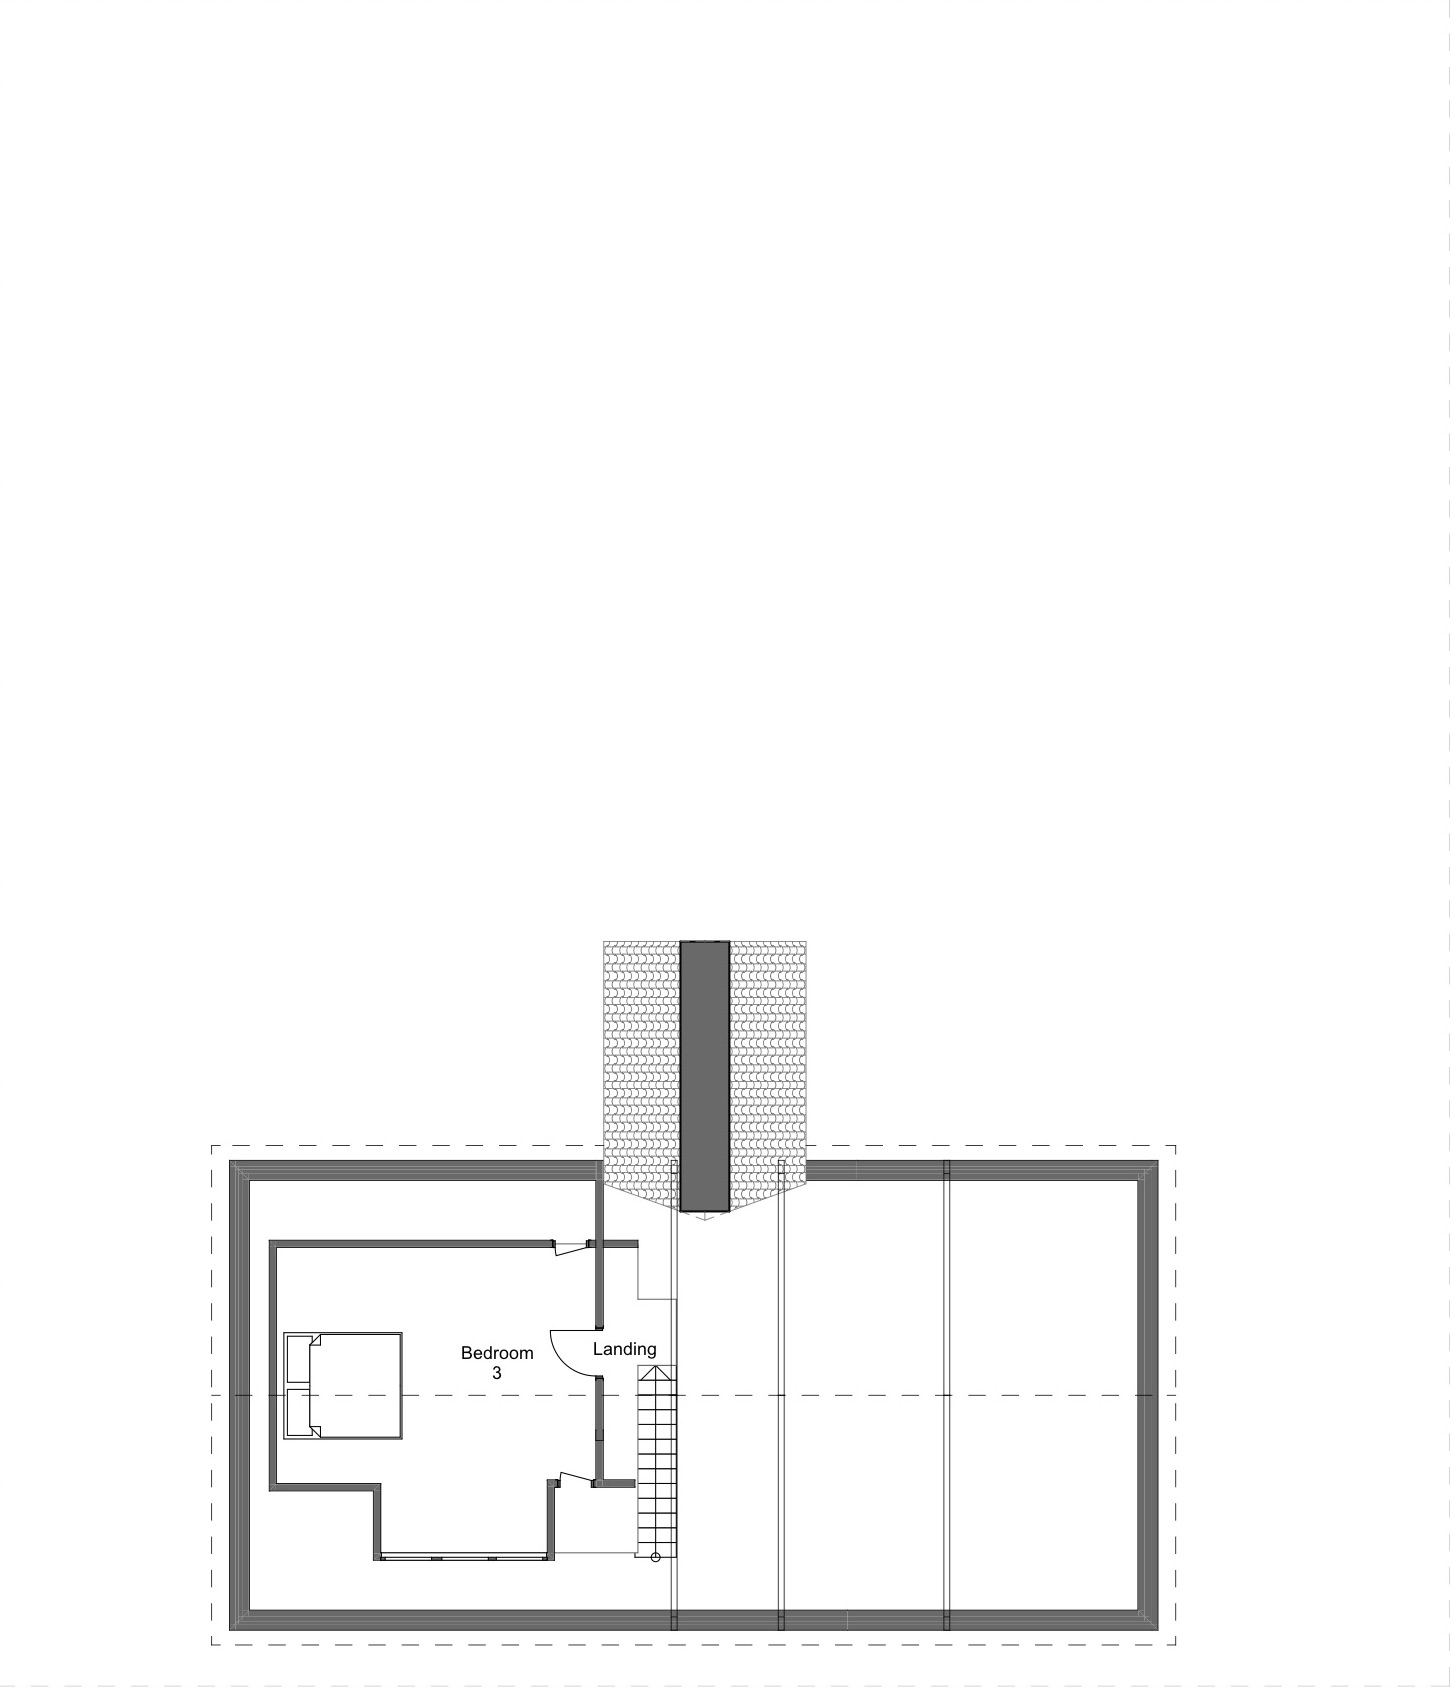 Existing - First Floor